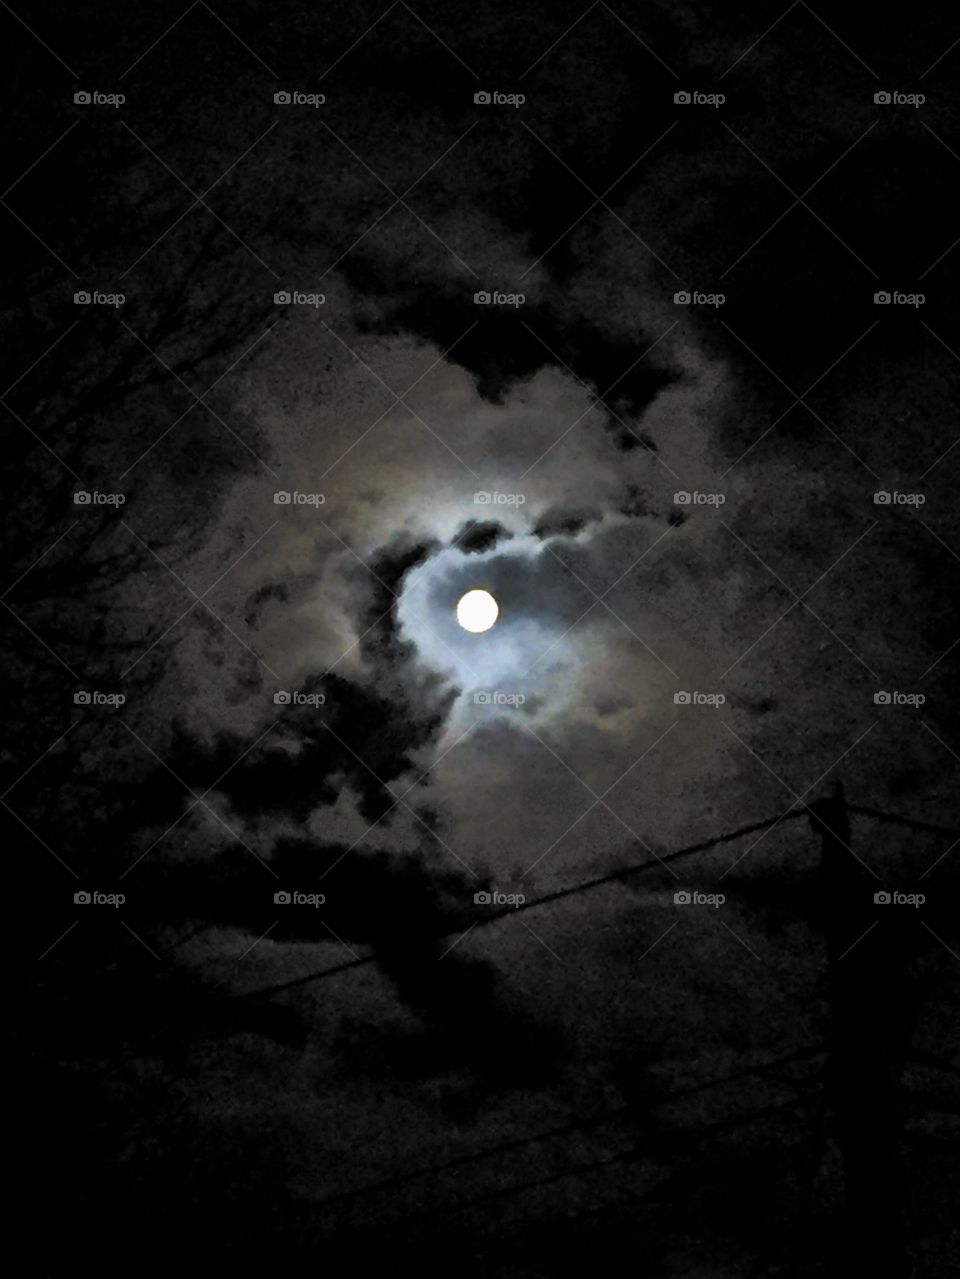 Full moon surrounded by clouds.